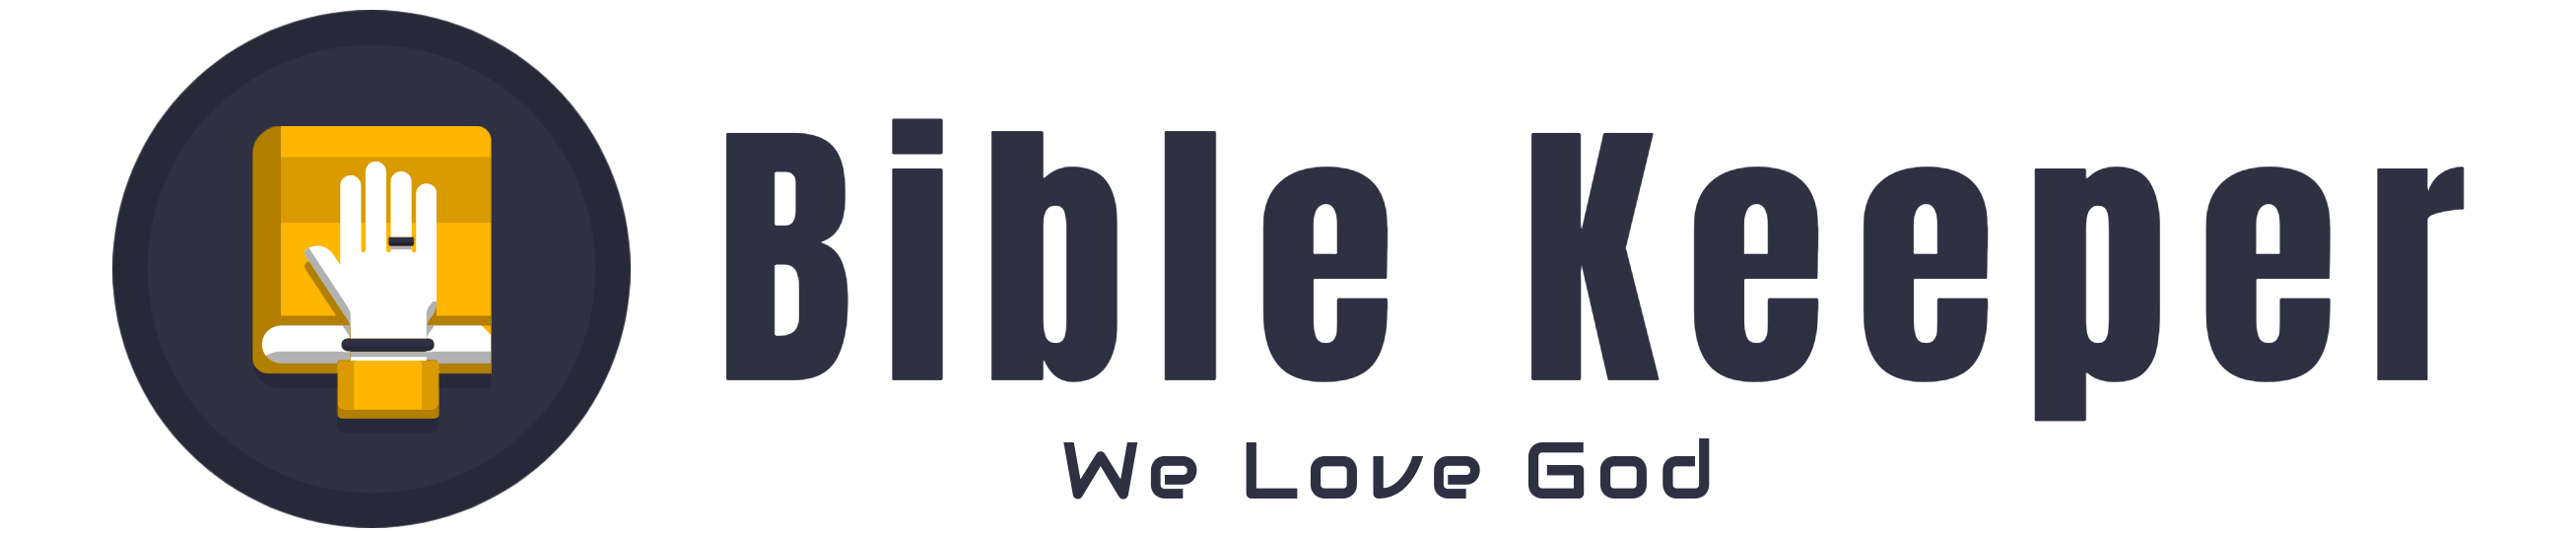 Company Logo For Bible Keeper'